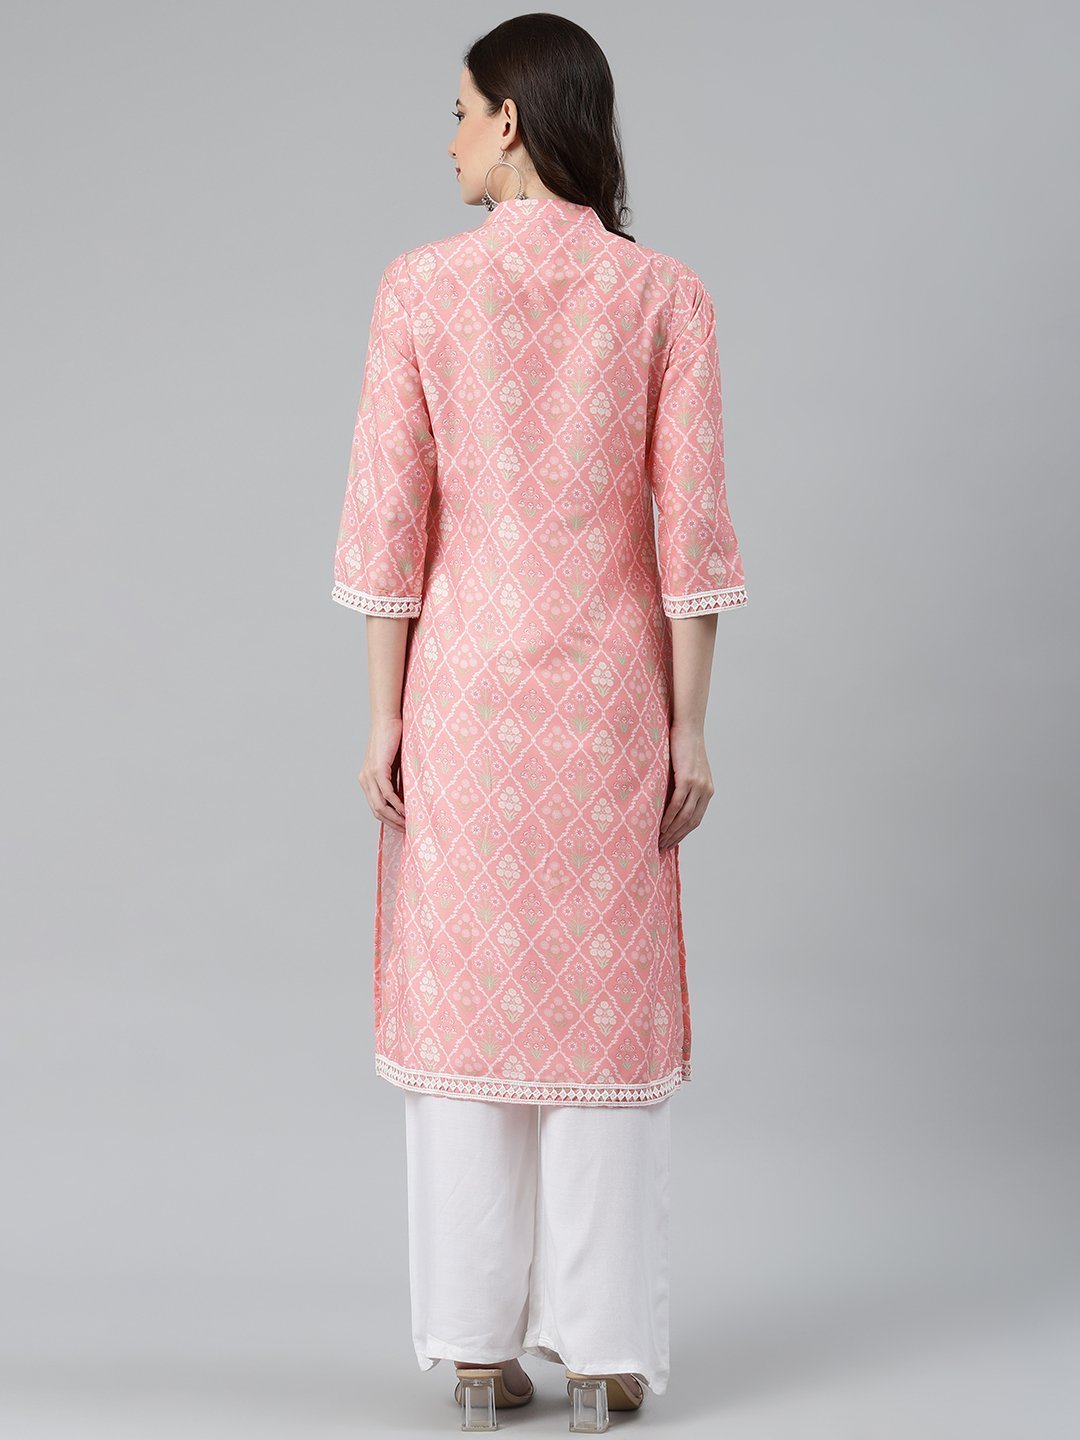 Women's Pink & Off White Floral Printed Kurta - Jompers